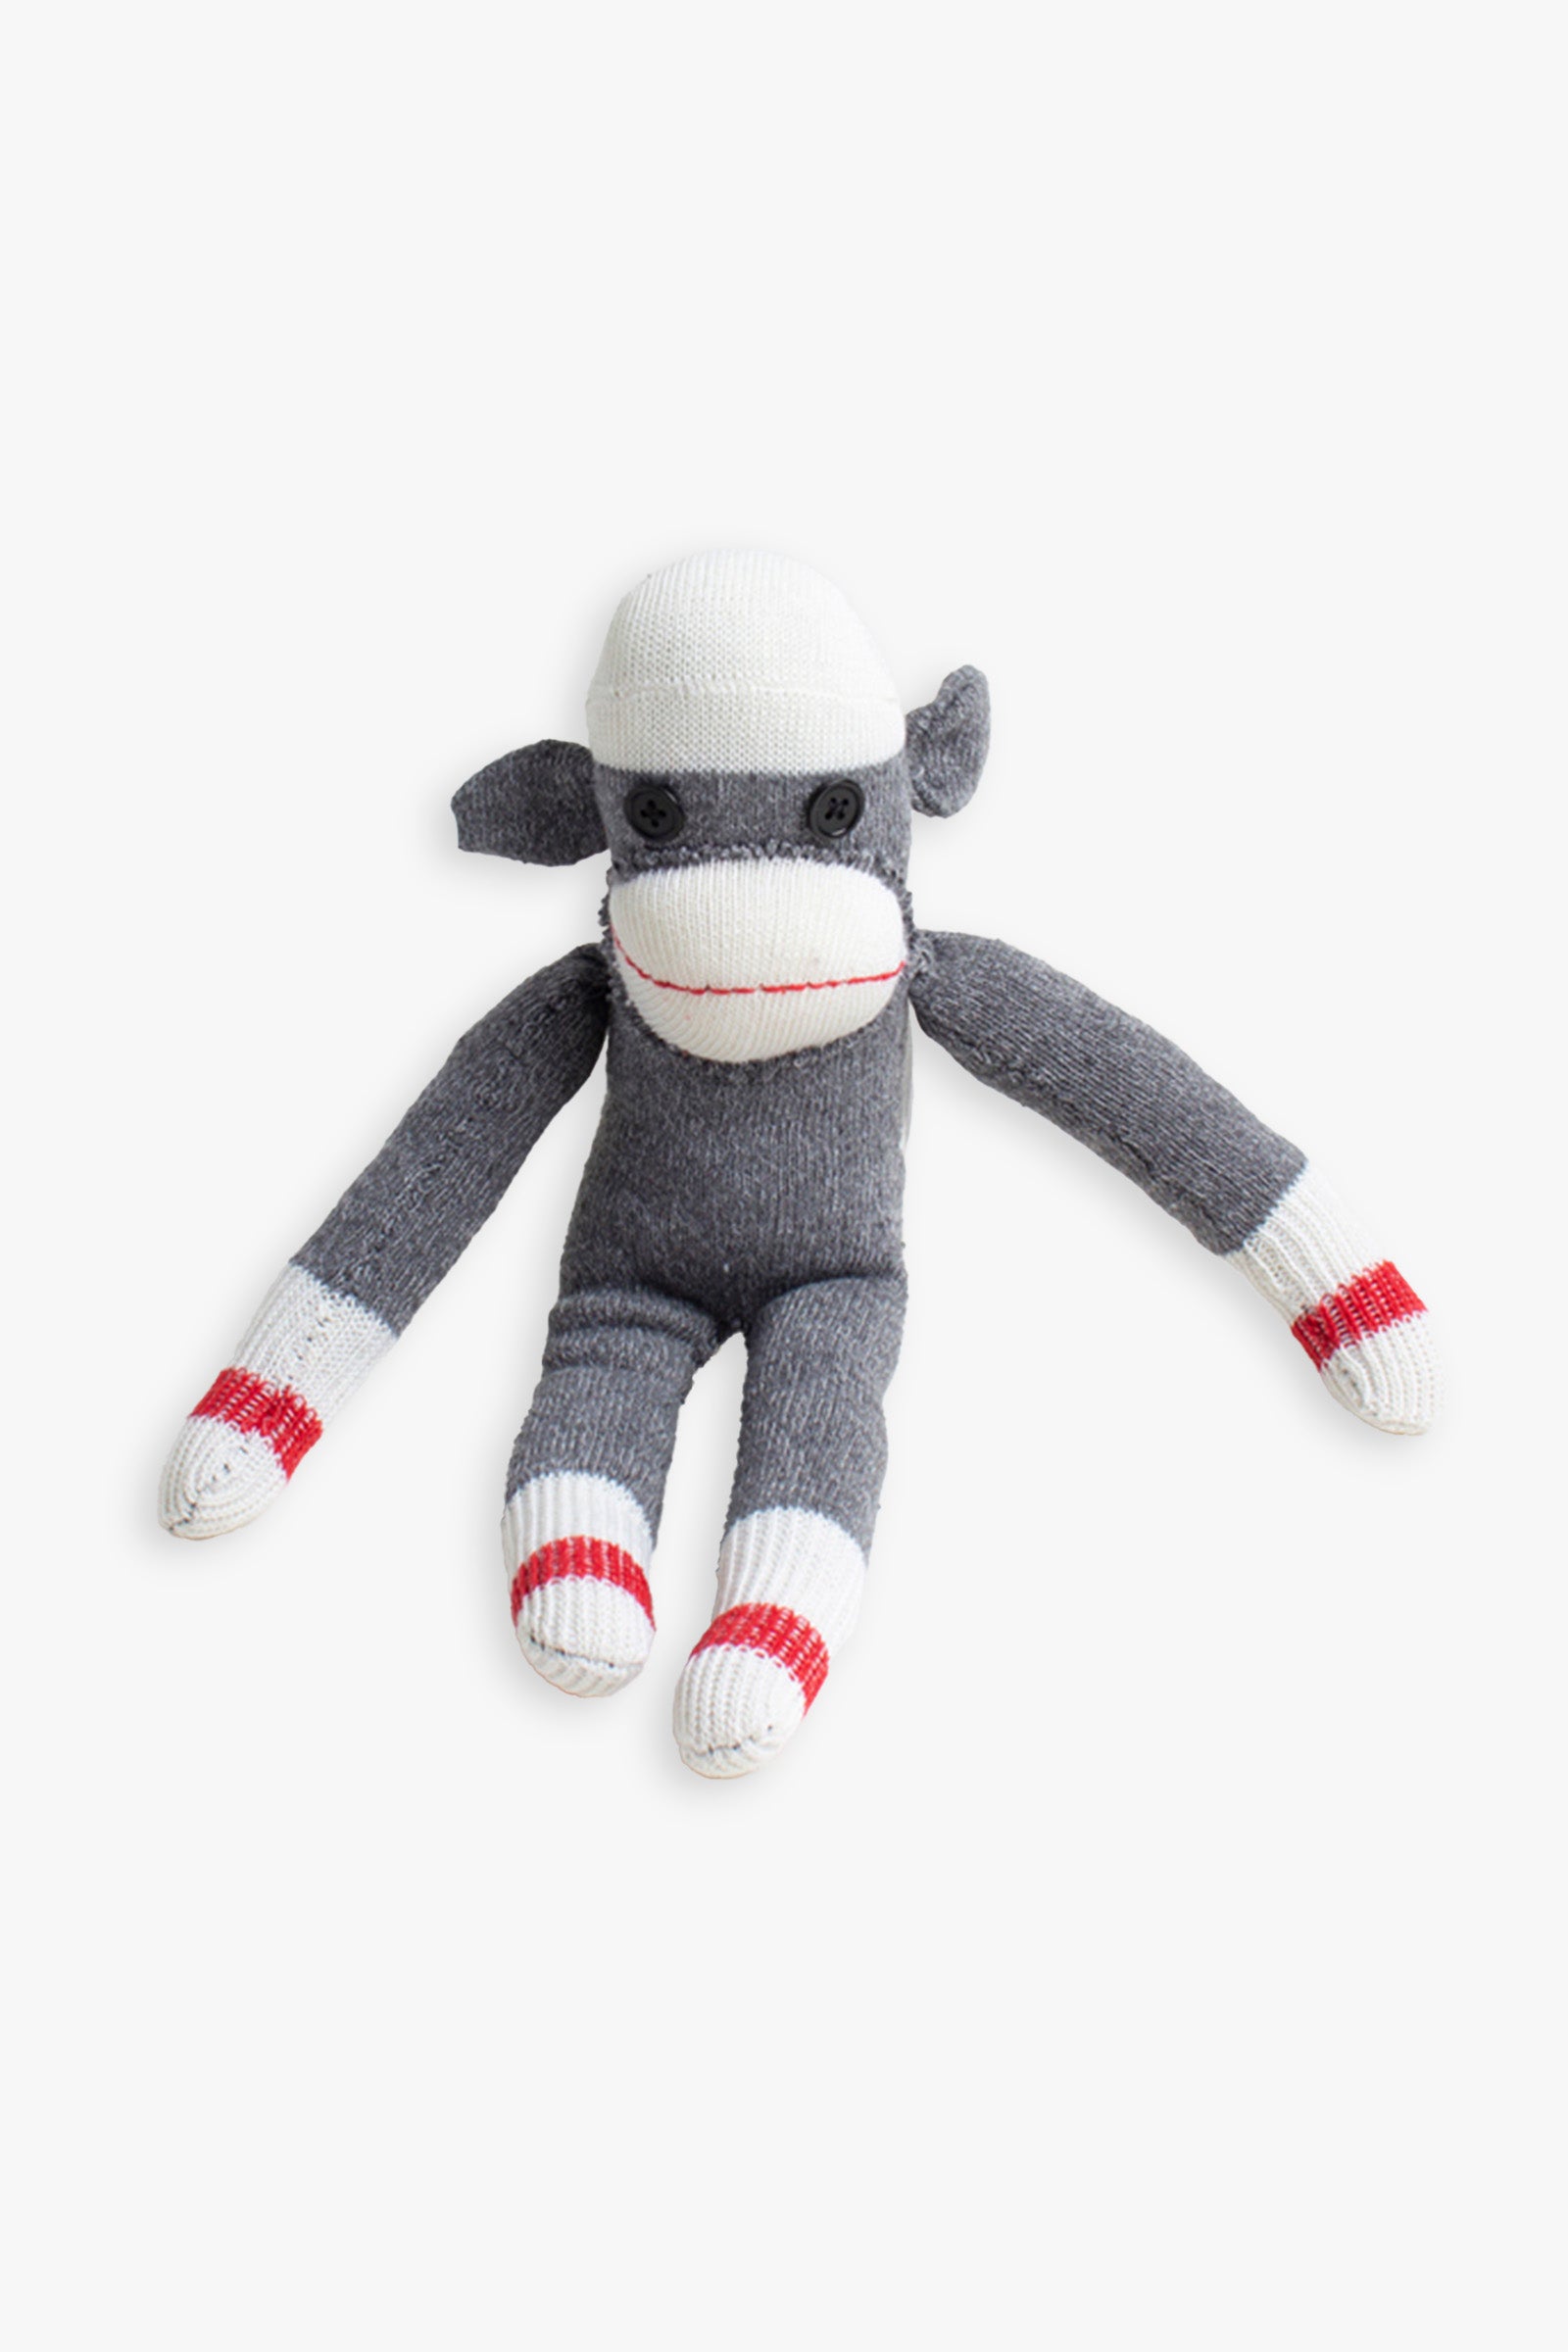 Great Northern DIY Craft Sock Monkey Kit With Video Tutorial